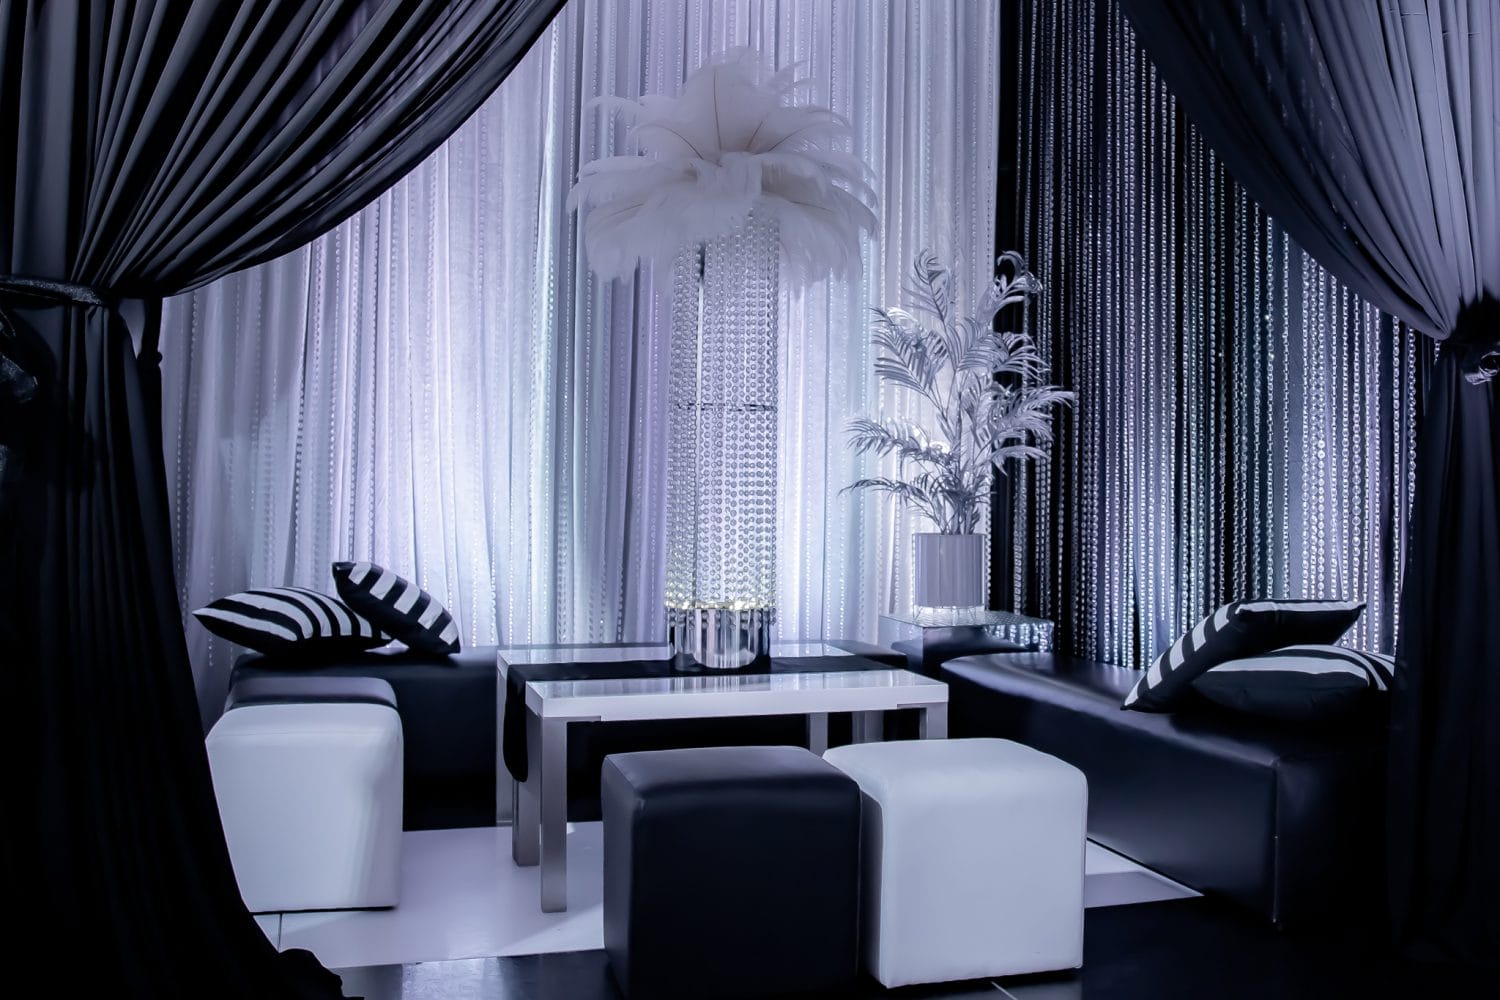 luxurious seating area at black & white party. Features chiffon drape, ottomans, and a feather centrepiece